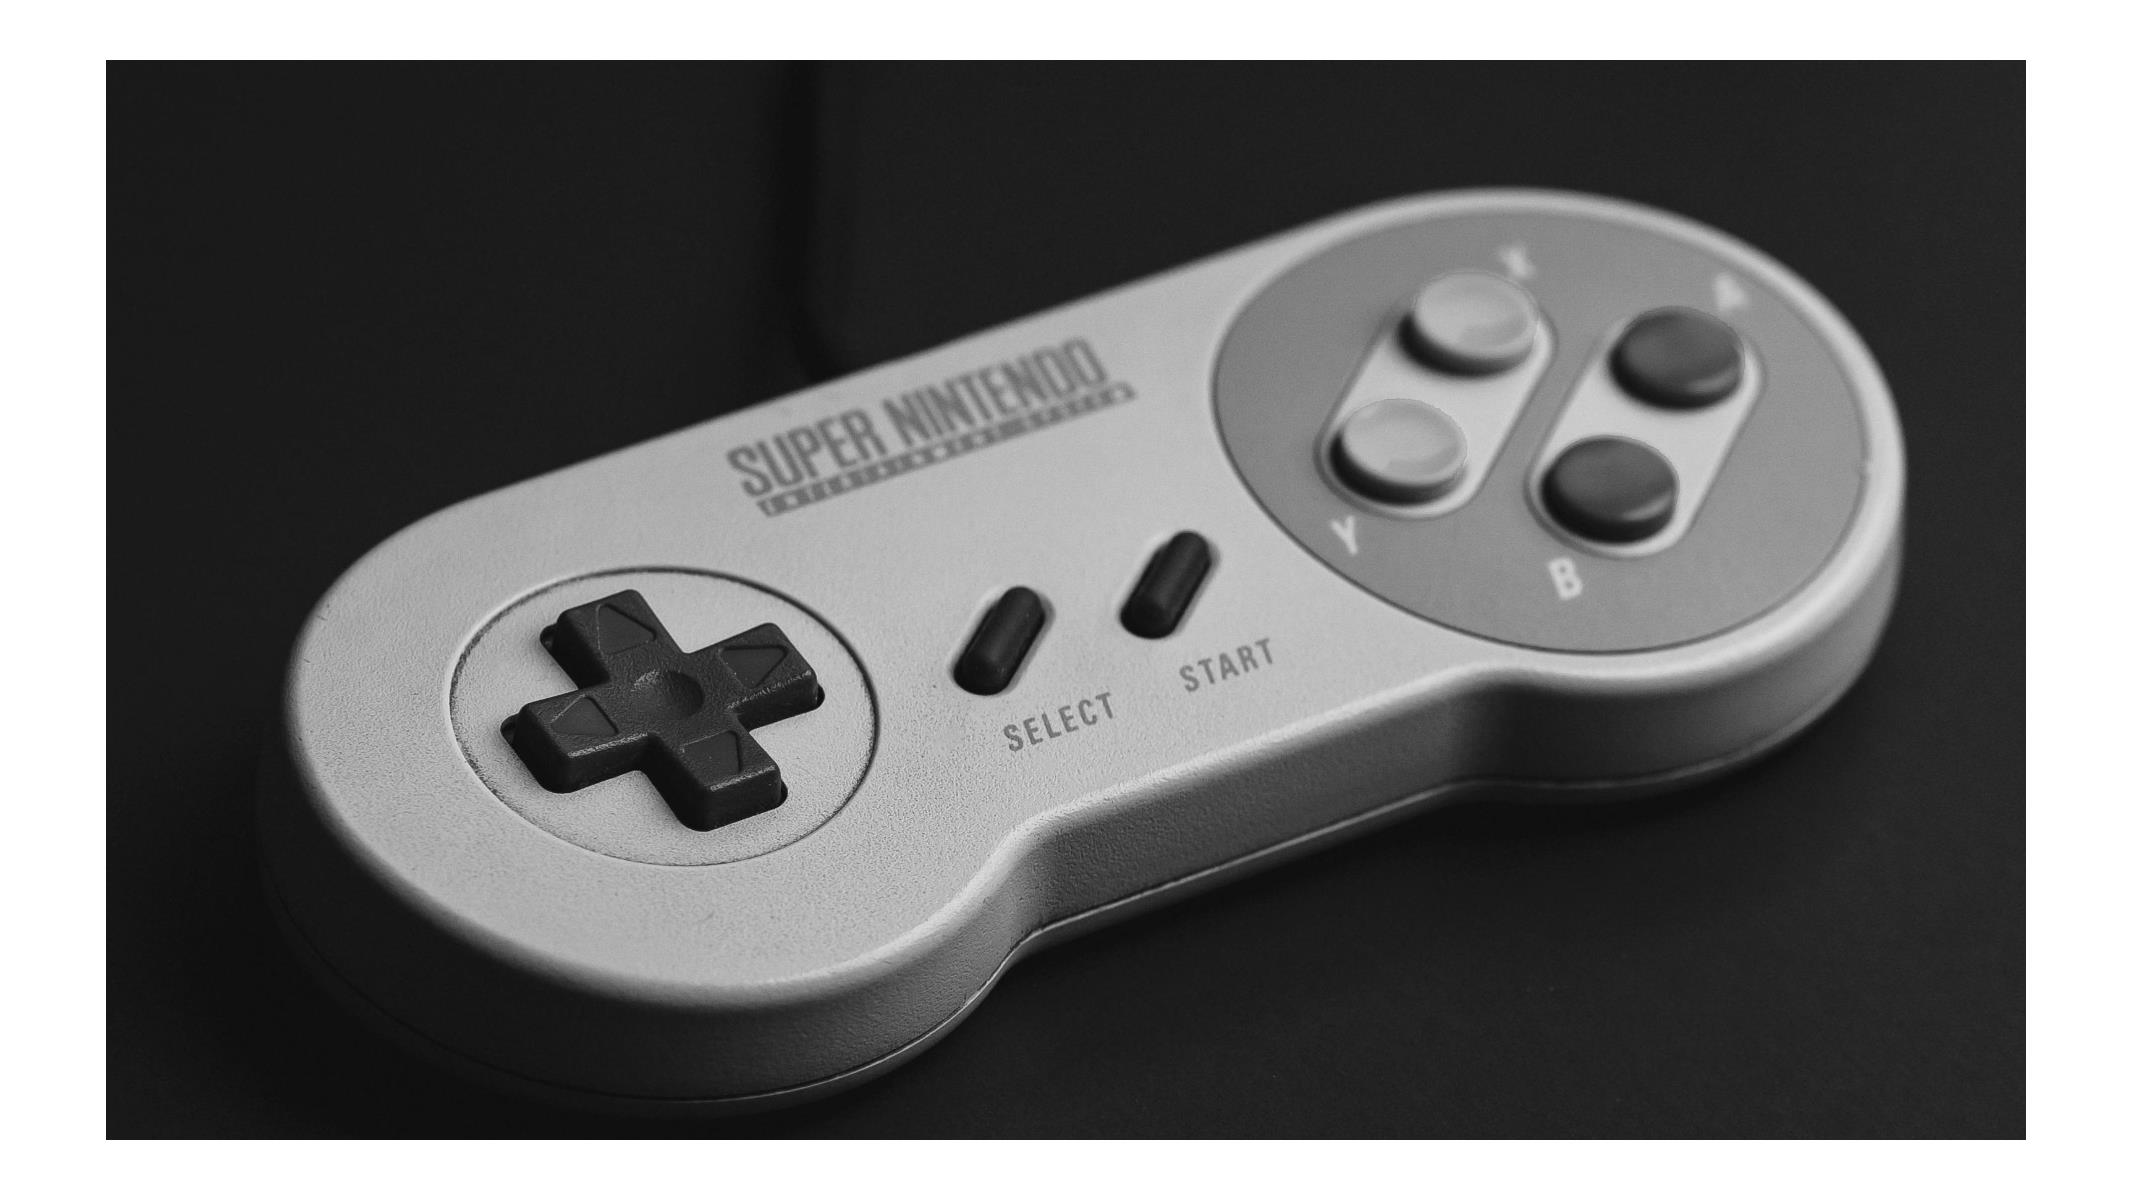 Steam now has support for Nintendo Online classic controllers